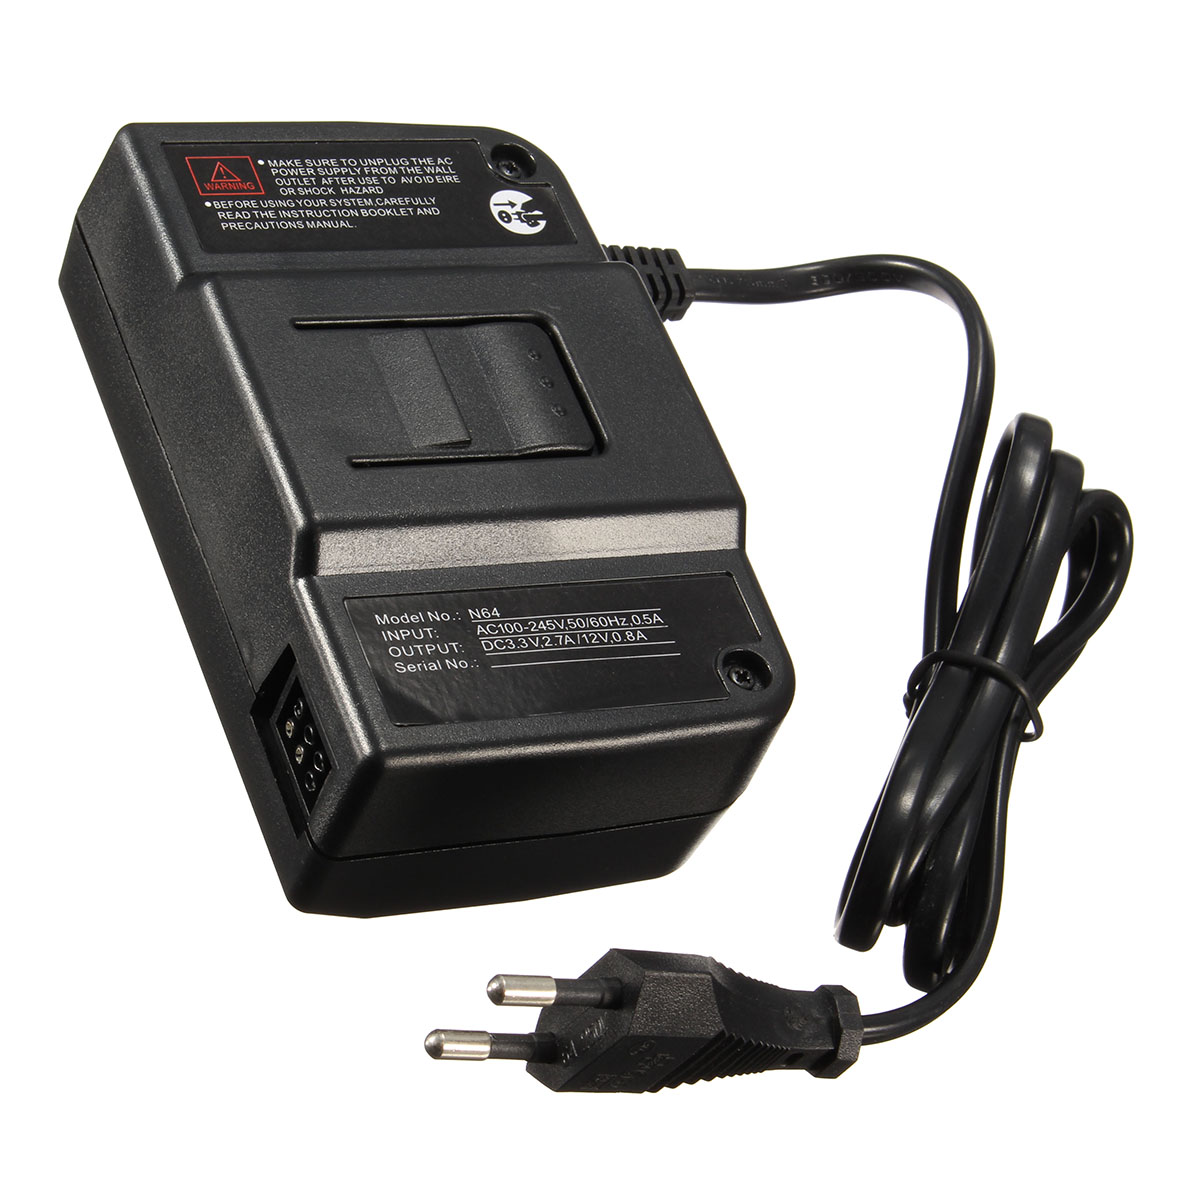 AC100-245V-DC-Power-Supply-Adapter-Charger-Wall-Charger-For-Nintendo-64-Game-Console-1219901